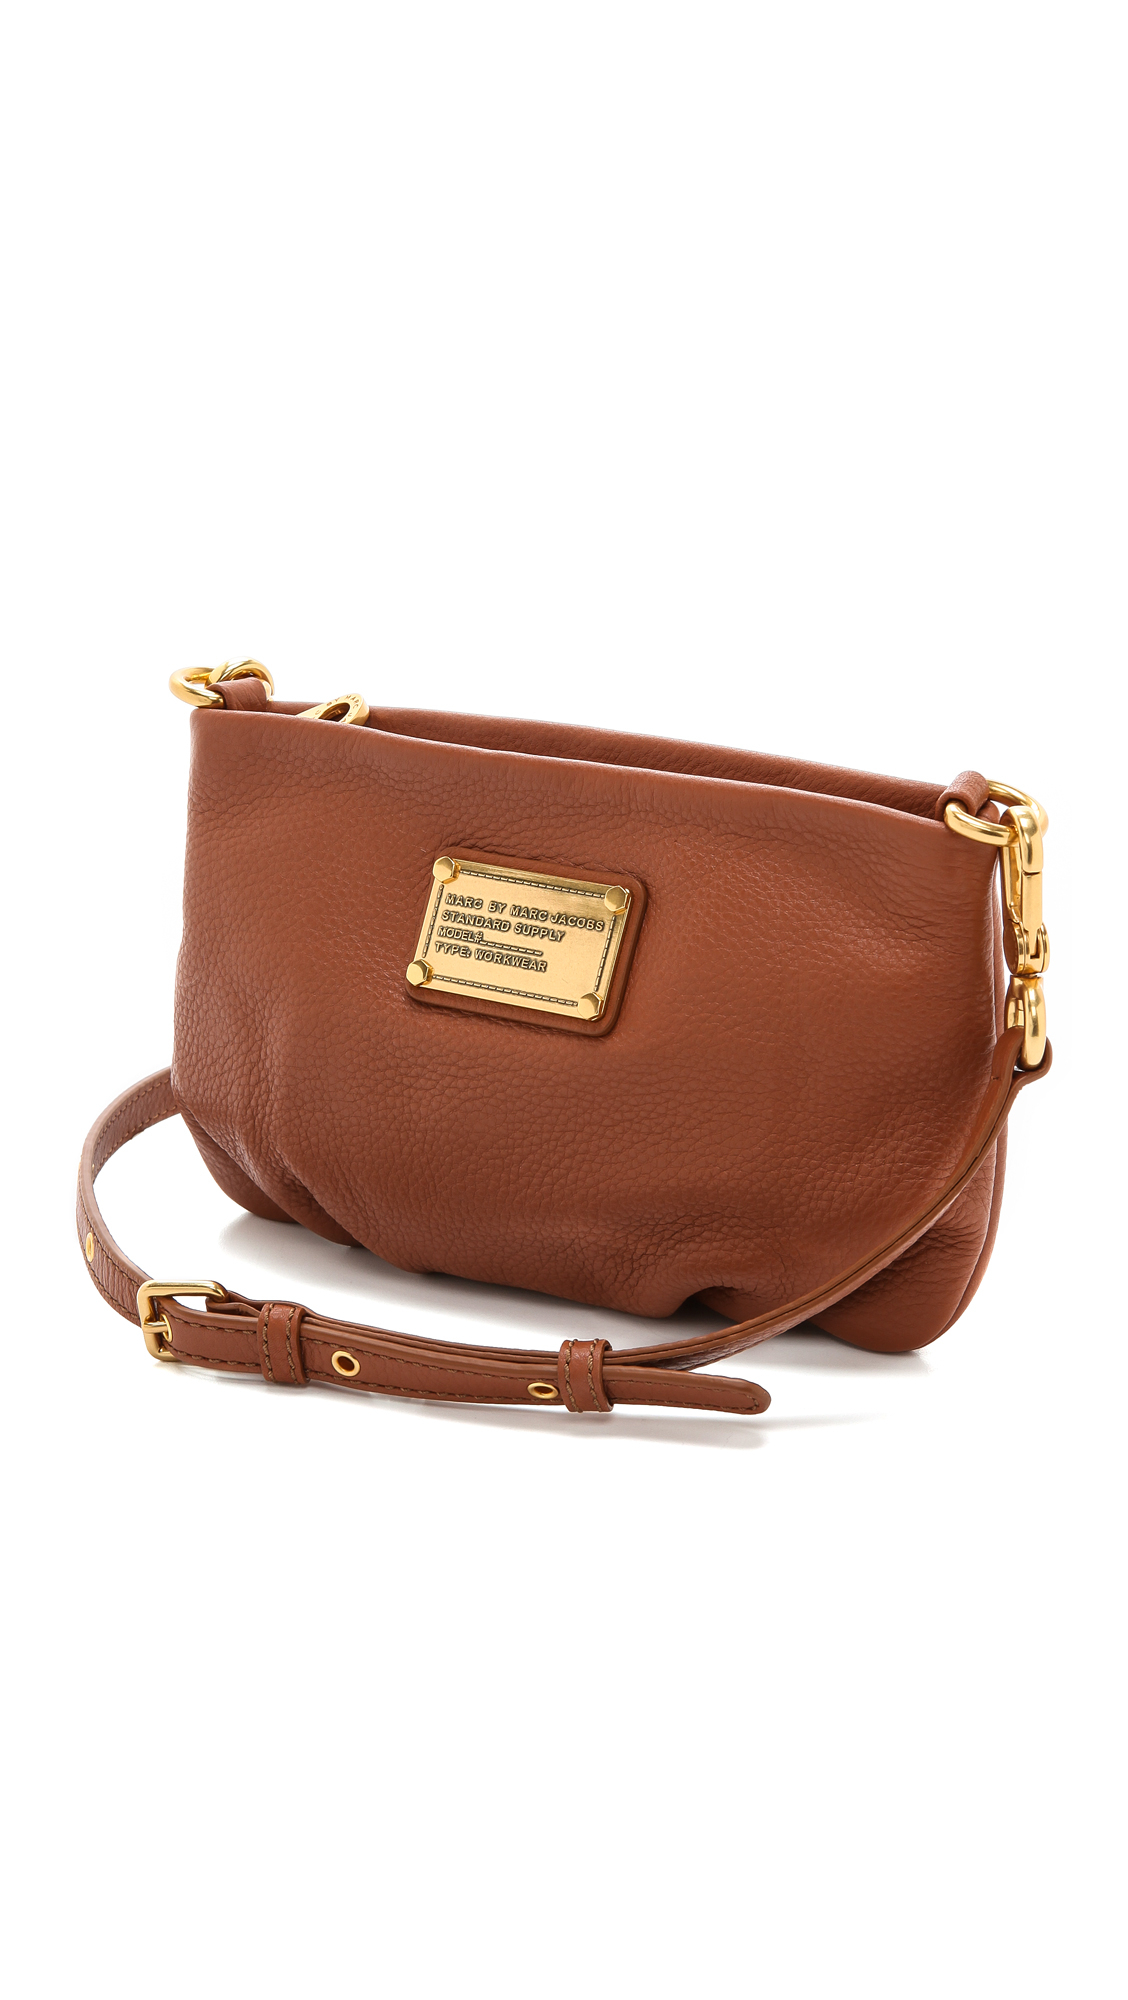 Marc By Marc Jacobs Classic Q Percy Bag in Smoked Almond (Brown) - Lyst